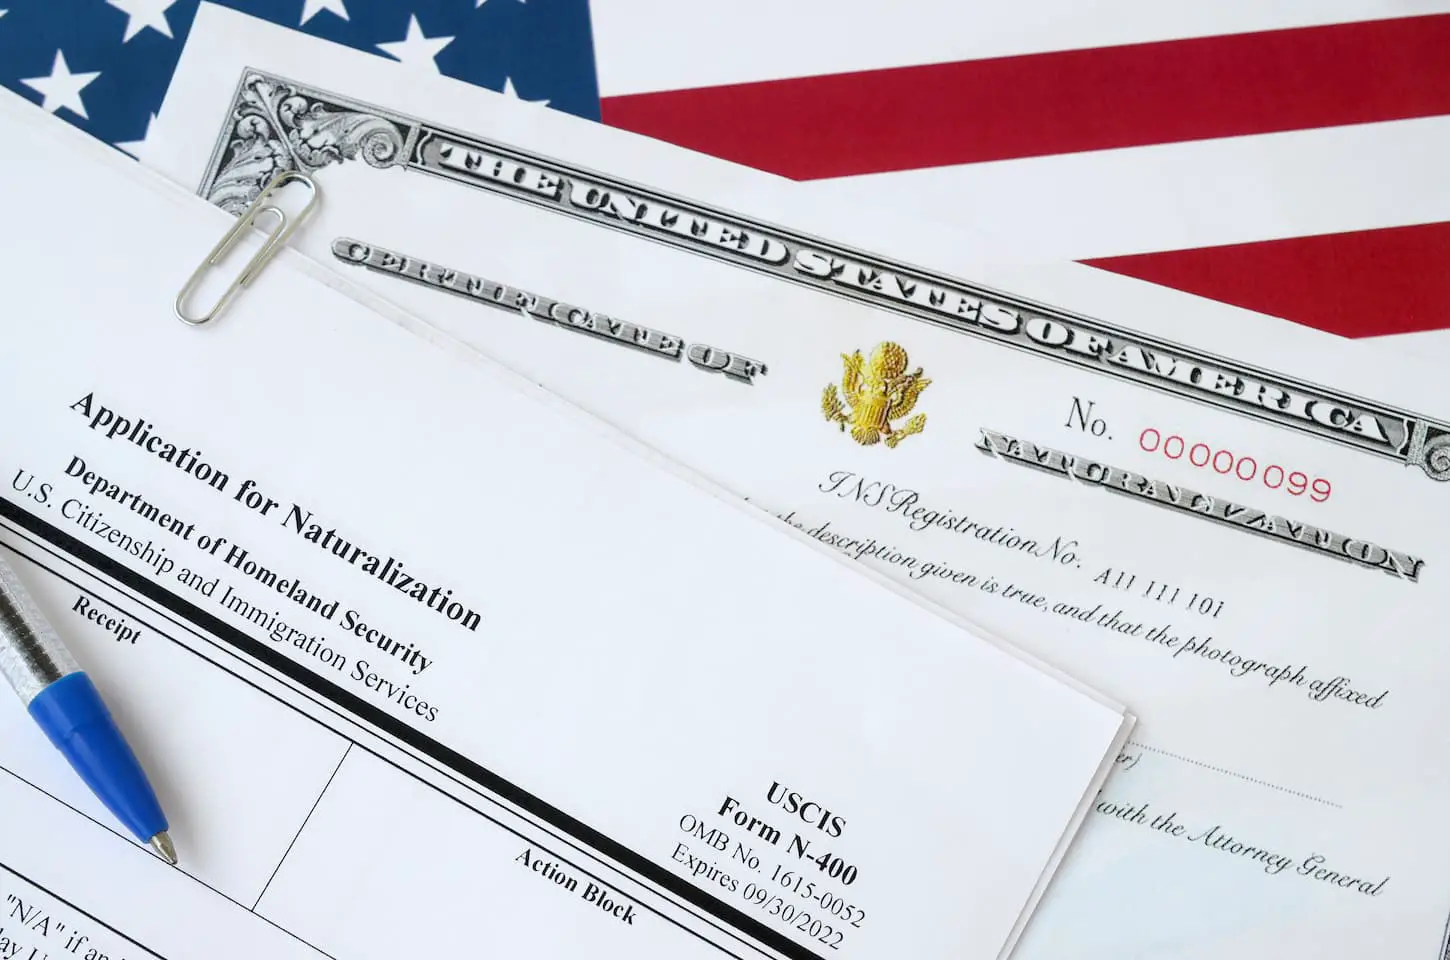 An image of the N-400 Application for Naturalization and Certificate of naturalization lies on the United States flag.